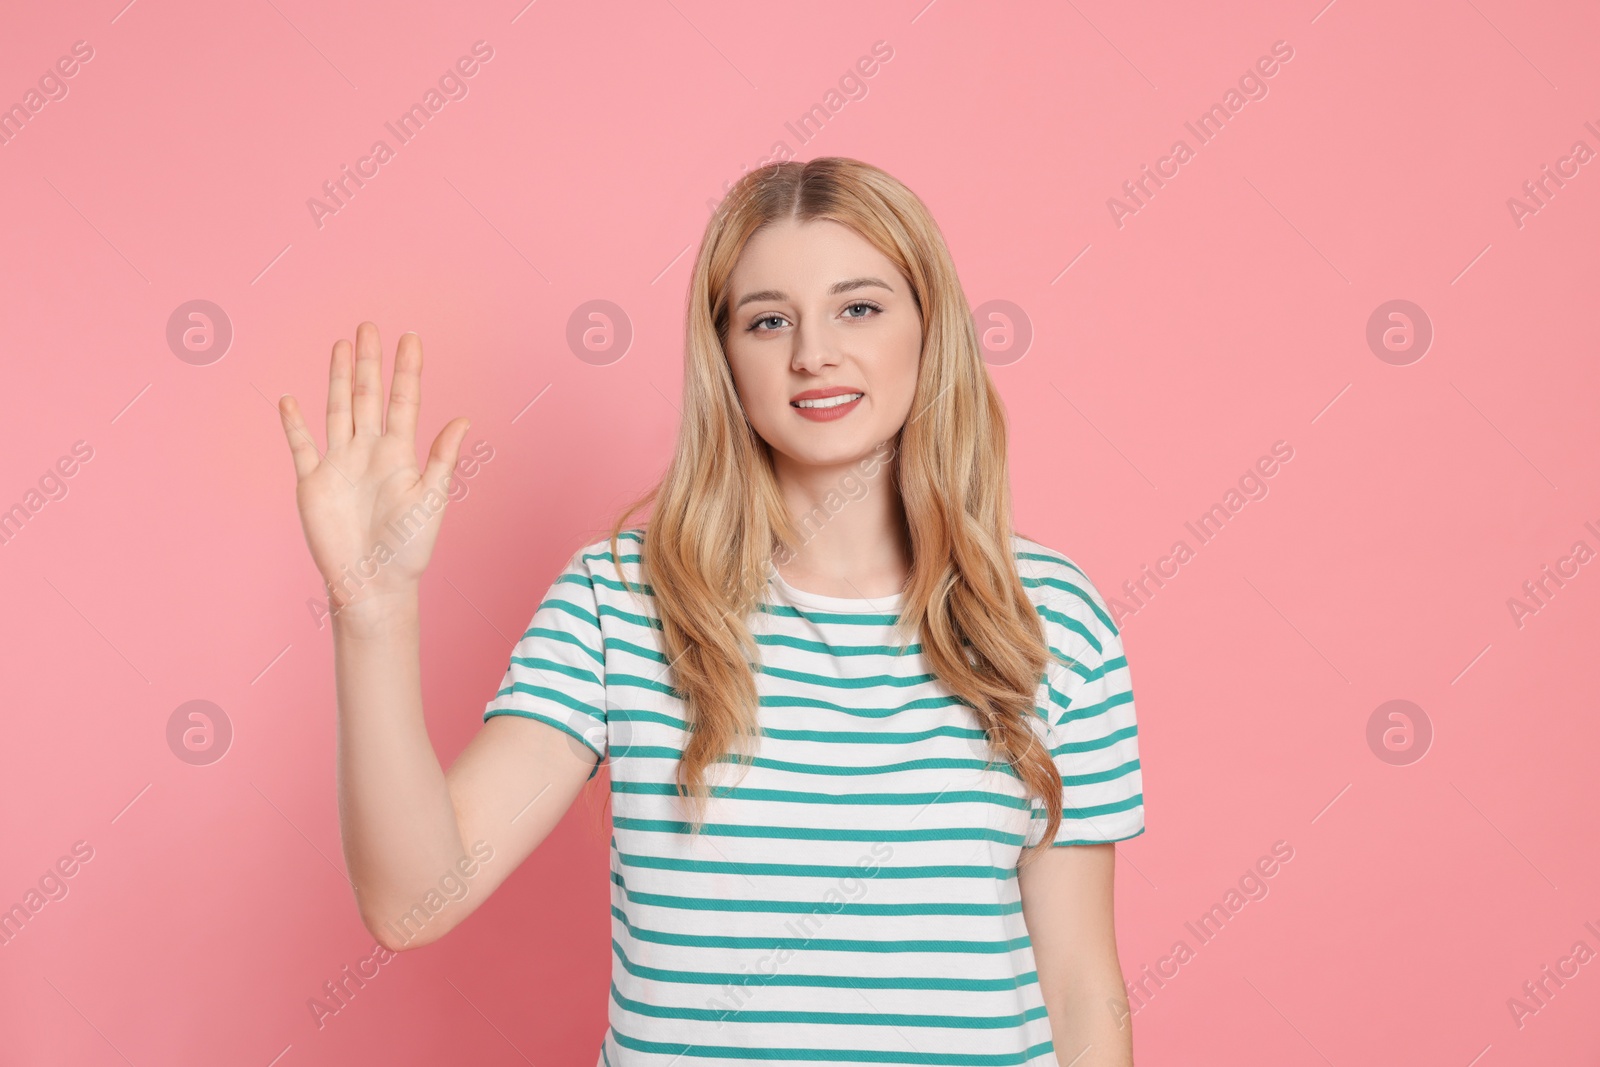 Photo of Happy woman giving high five on pink background